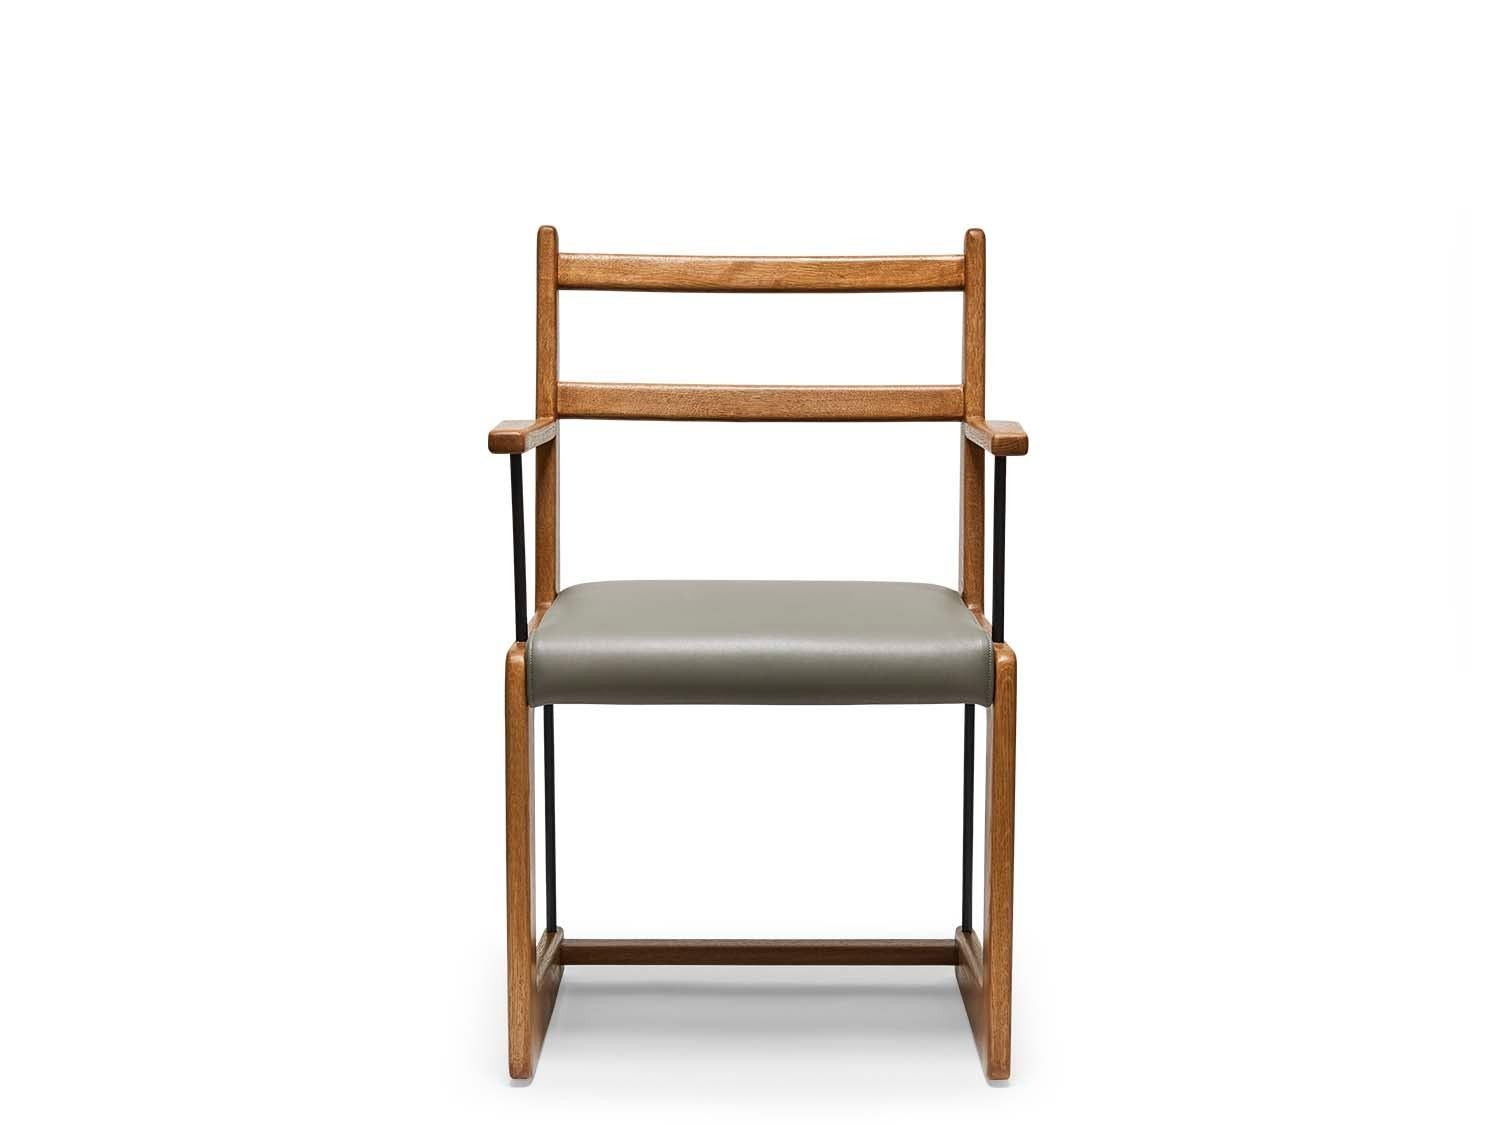 The Cruz dining chair is made from a solid American walnut or white oak frame that features a cantilevered shape and lacquered brass stretchers. The seat is upholstered. Shown here in Oiled Oak.

The Lawson-Fenning Collection is designed and